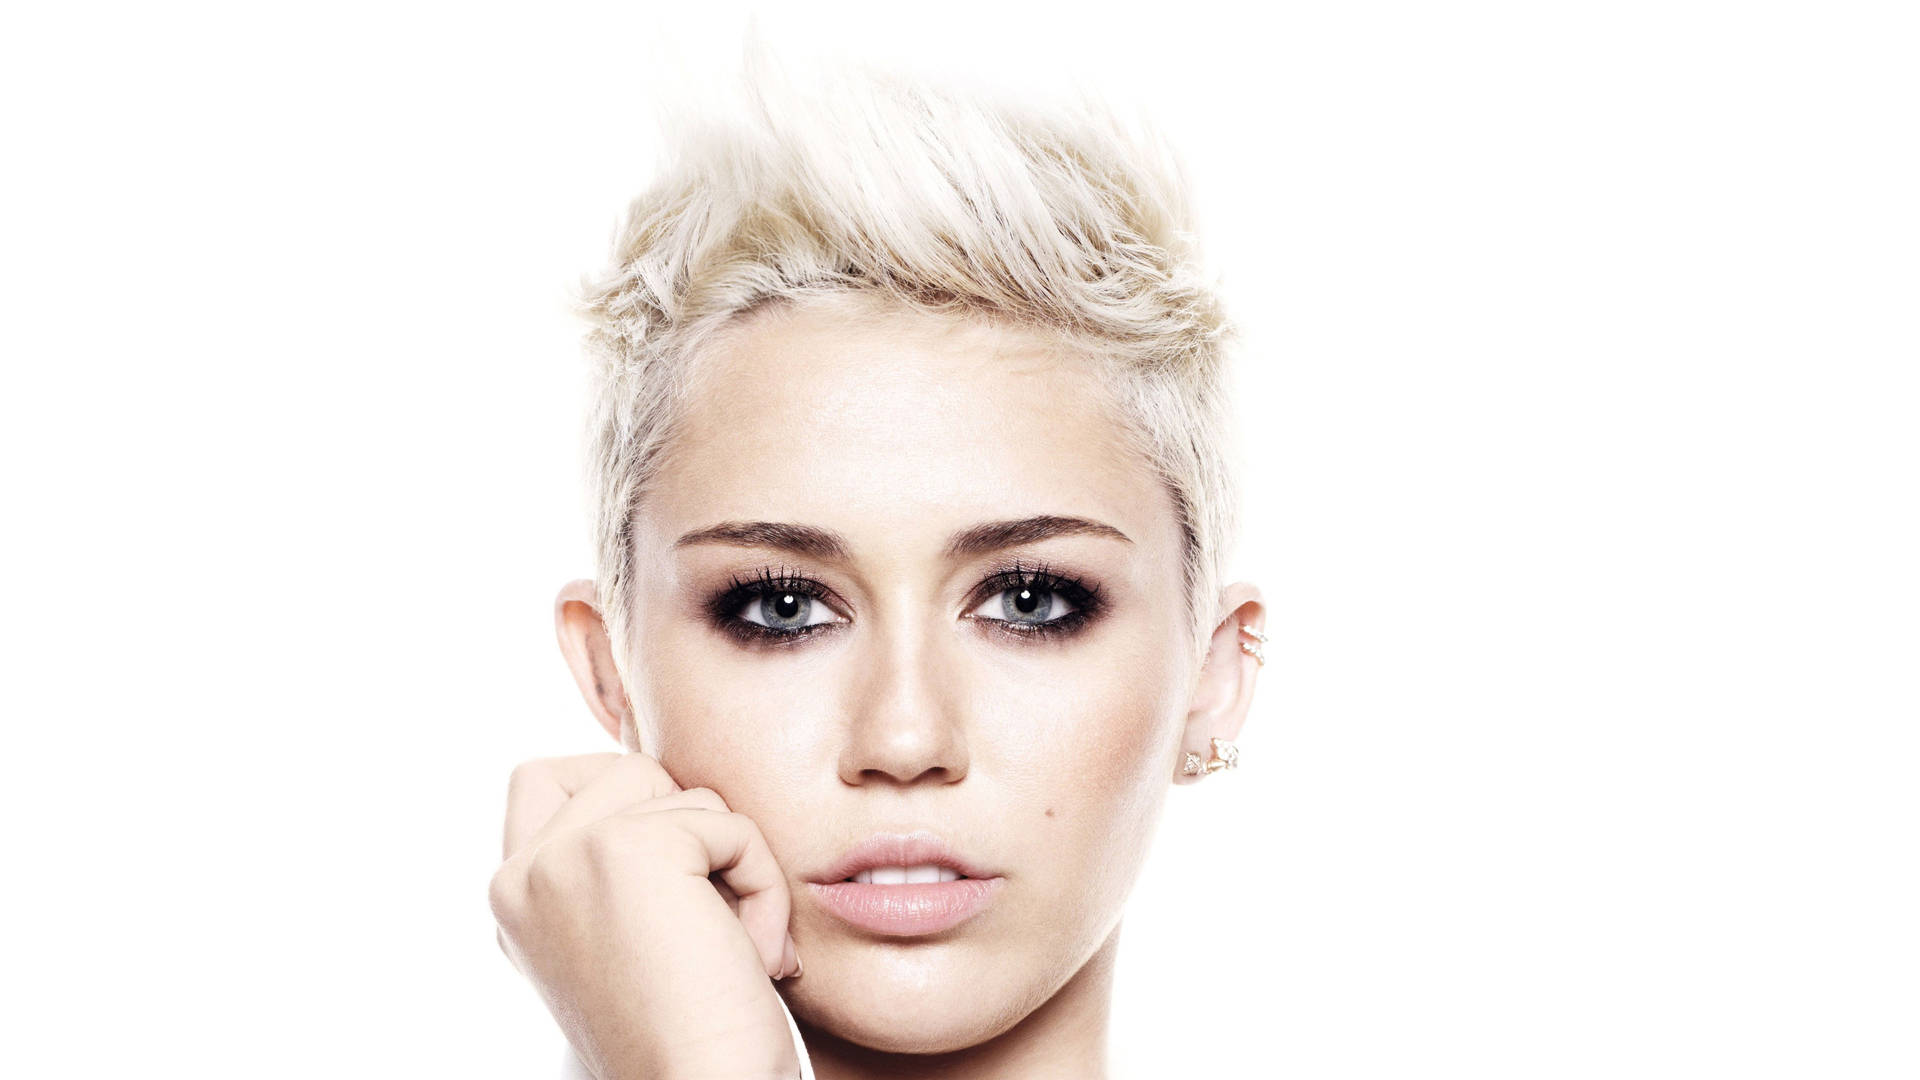 Miley Cyrus with Edgy Pixie Cut Wallpaper